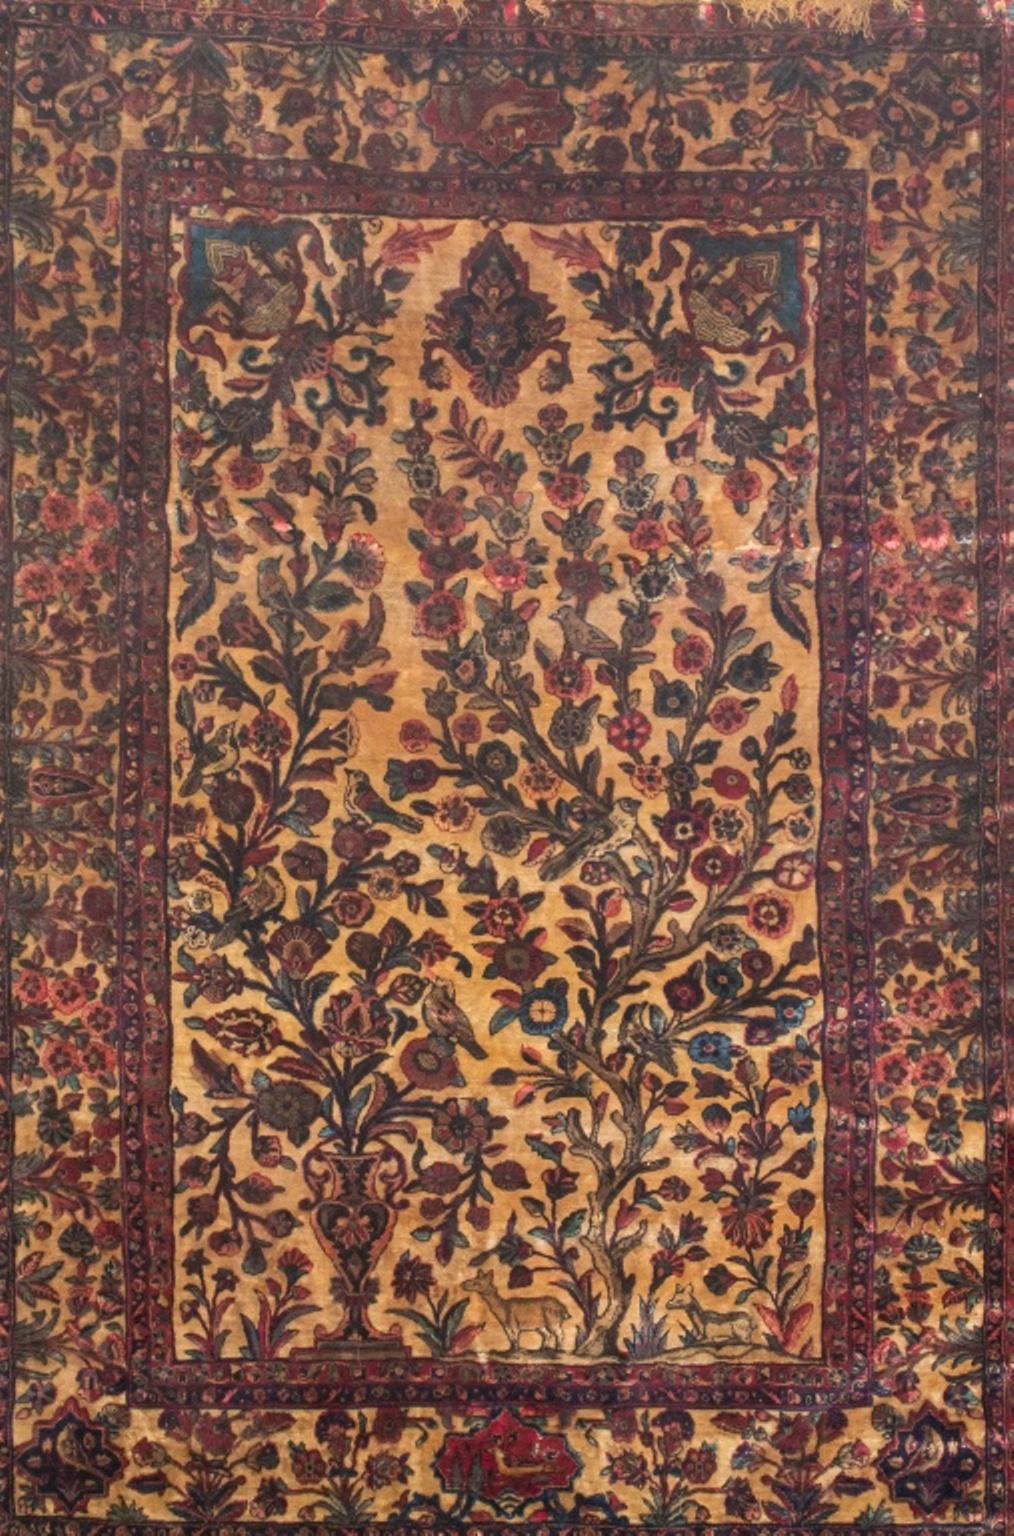 Persian Kashan antique silk pictorial rug, early 20th century, a flowering vase next to a tree with birds and deer on an ivory field, within a shrub and cartouche border. In very good vintage condition.

Dealer: S138XX